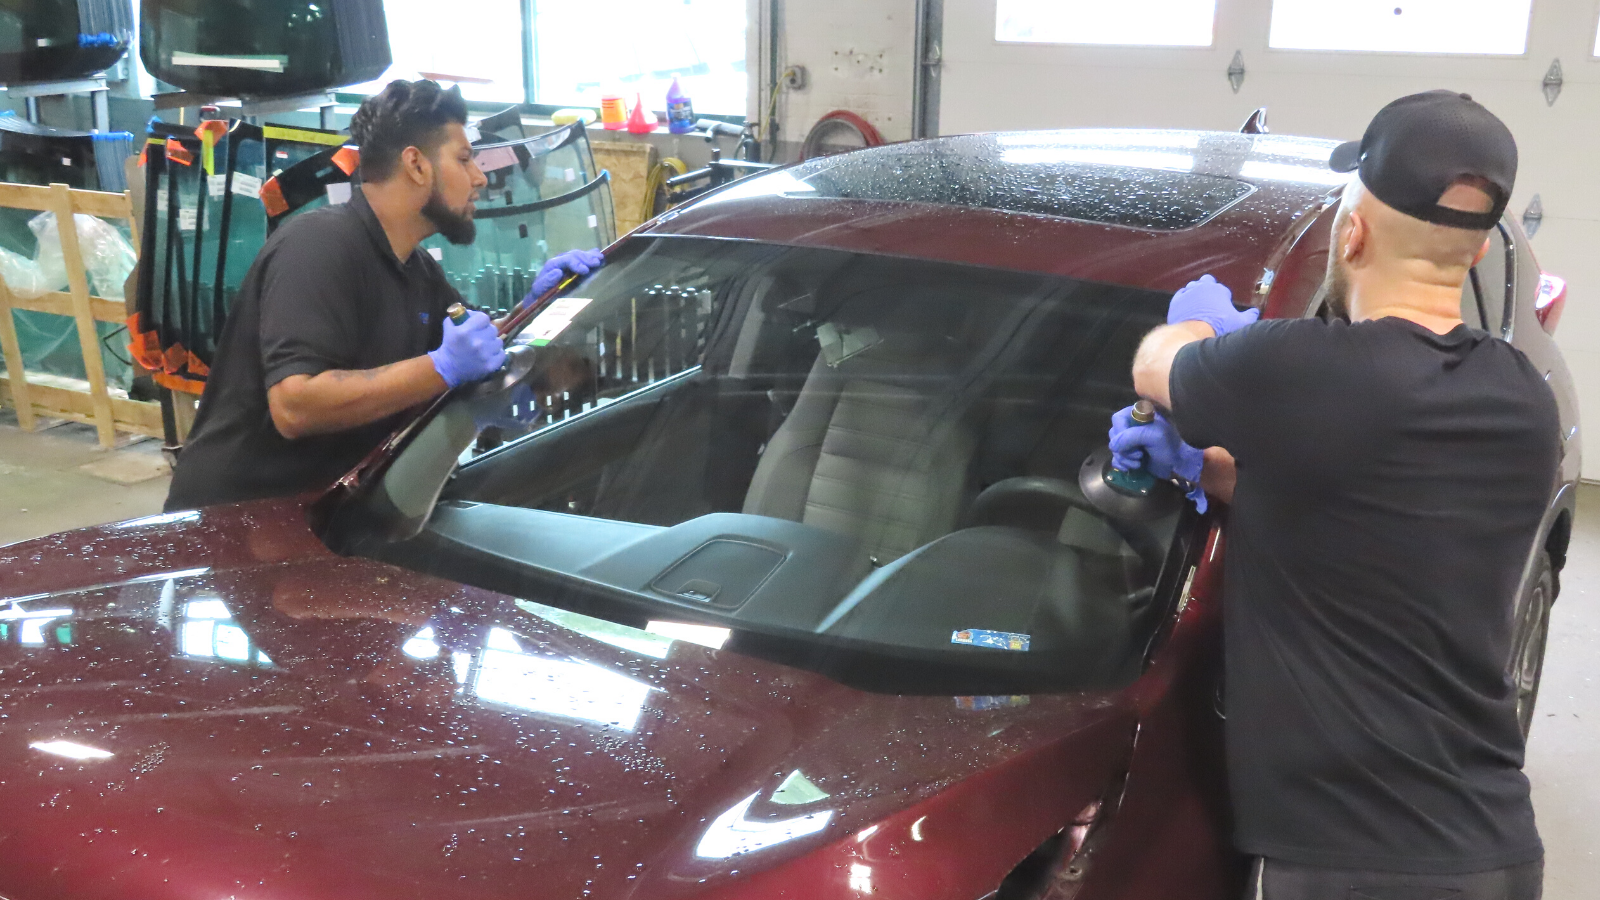 Plymouth Glass windshield repair technicians replacing a windshield in the shop